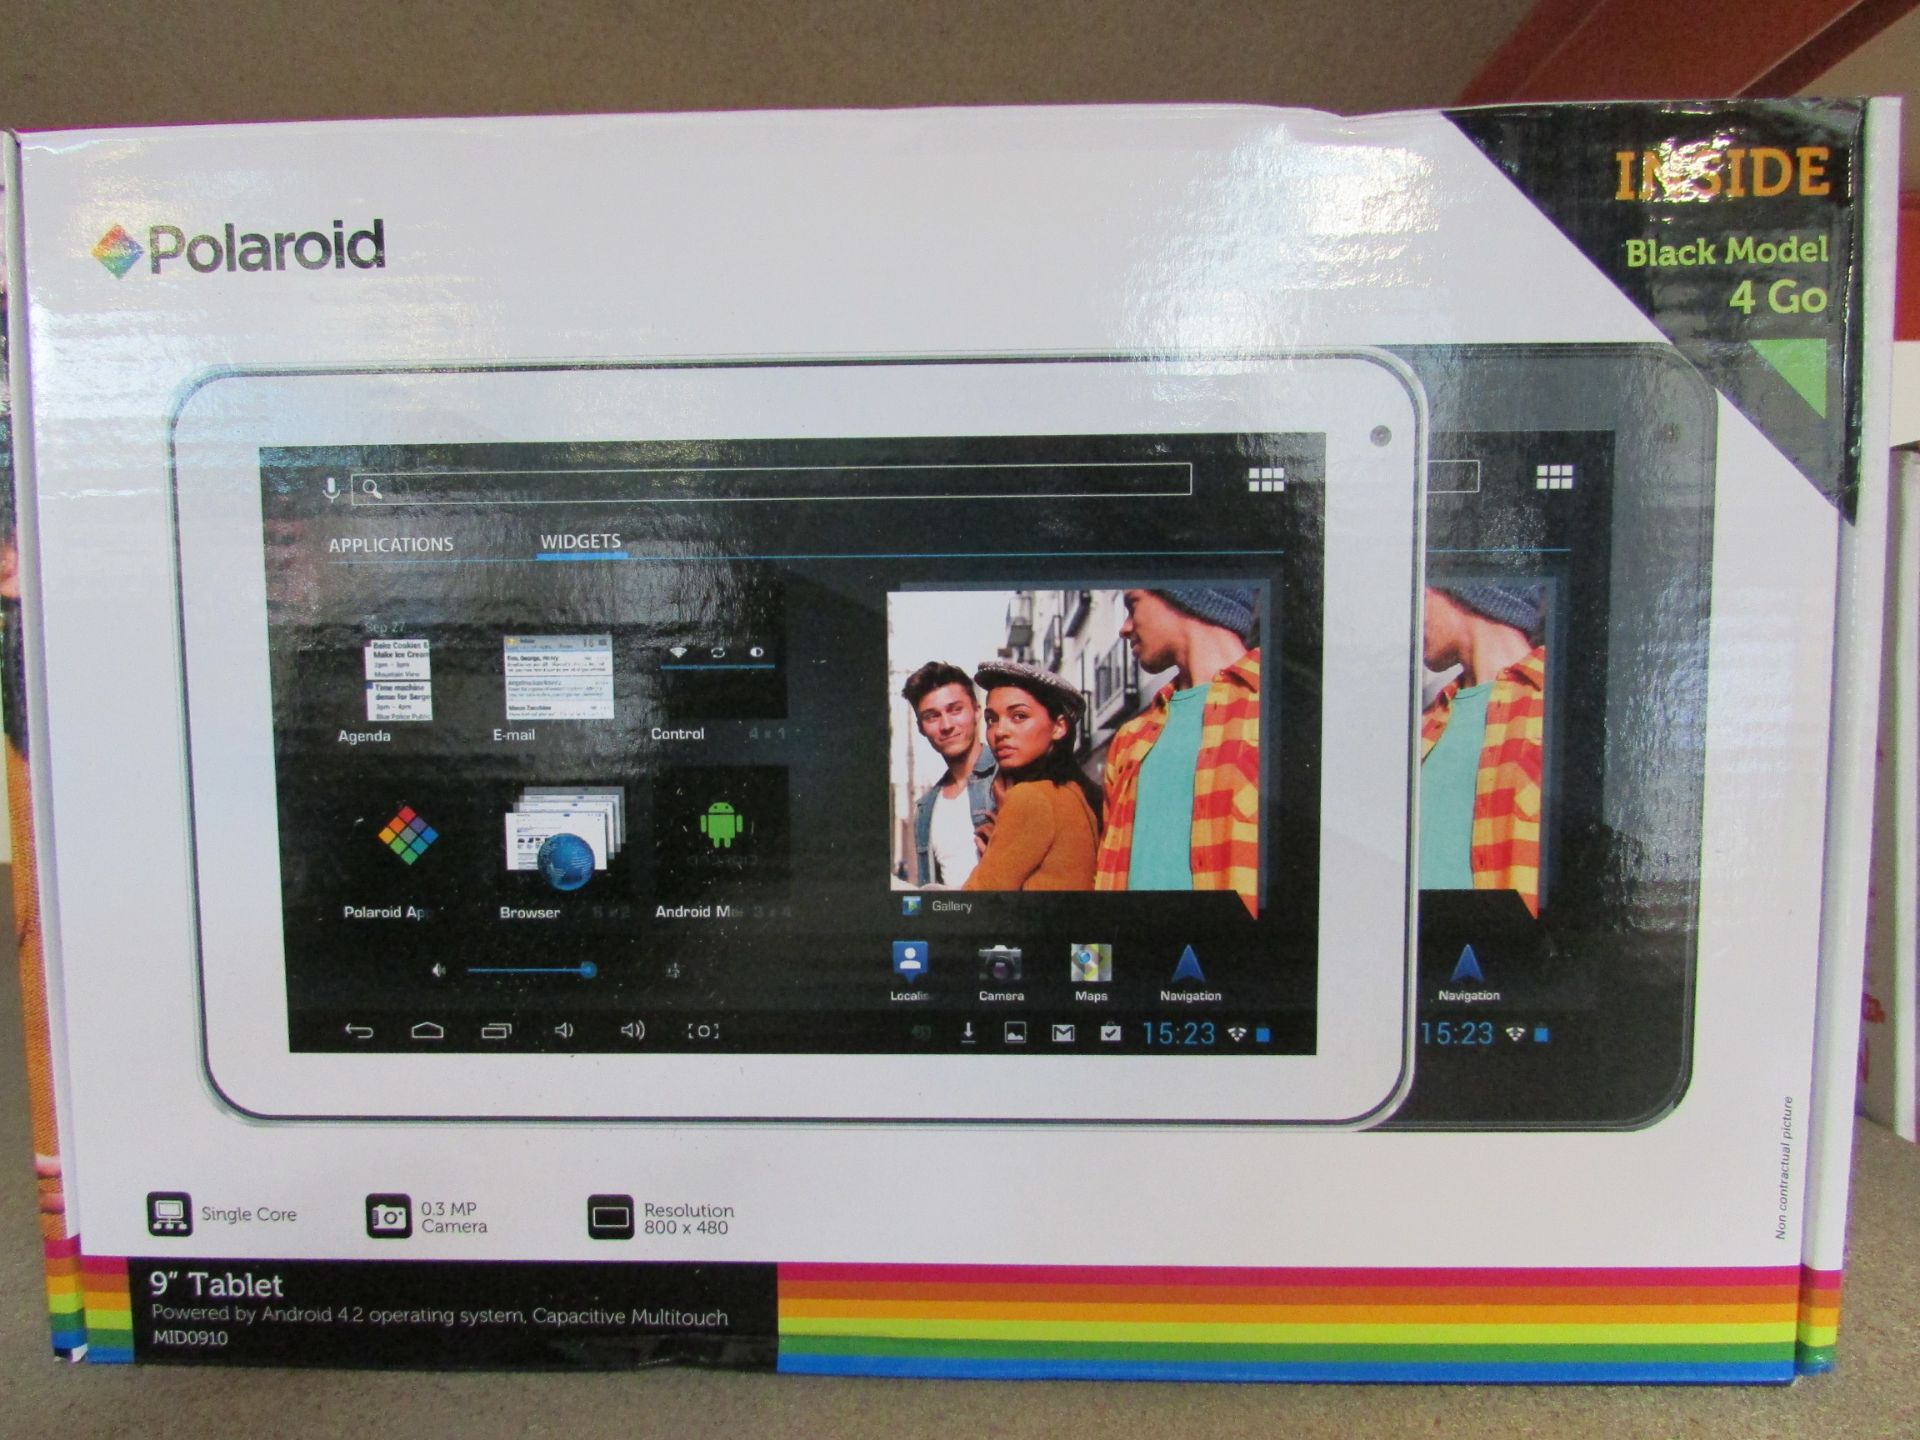 POLAROID 9" TABLET POWERD BY ANDROID 4.2 OPERATING SYSTEM